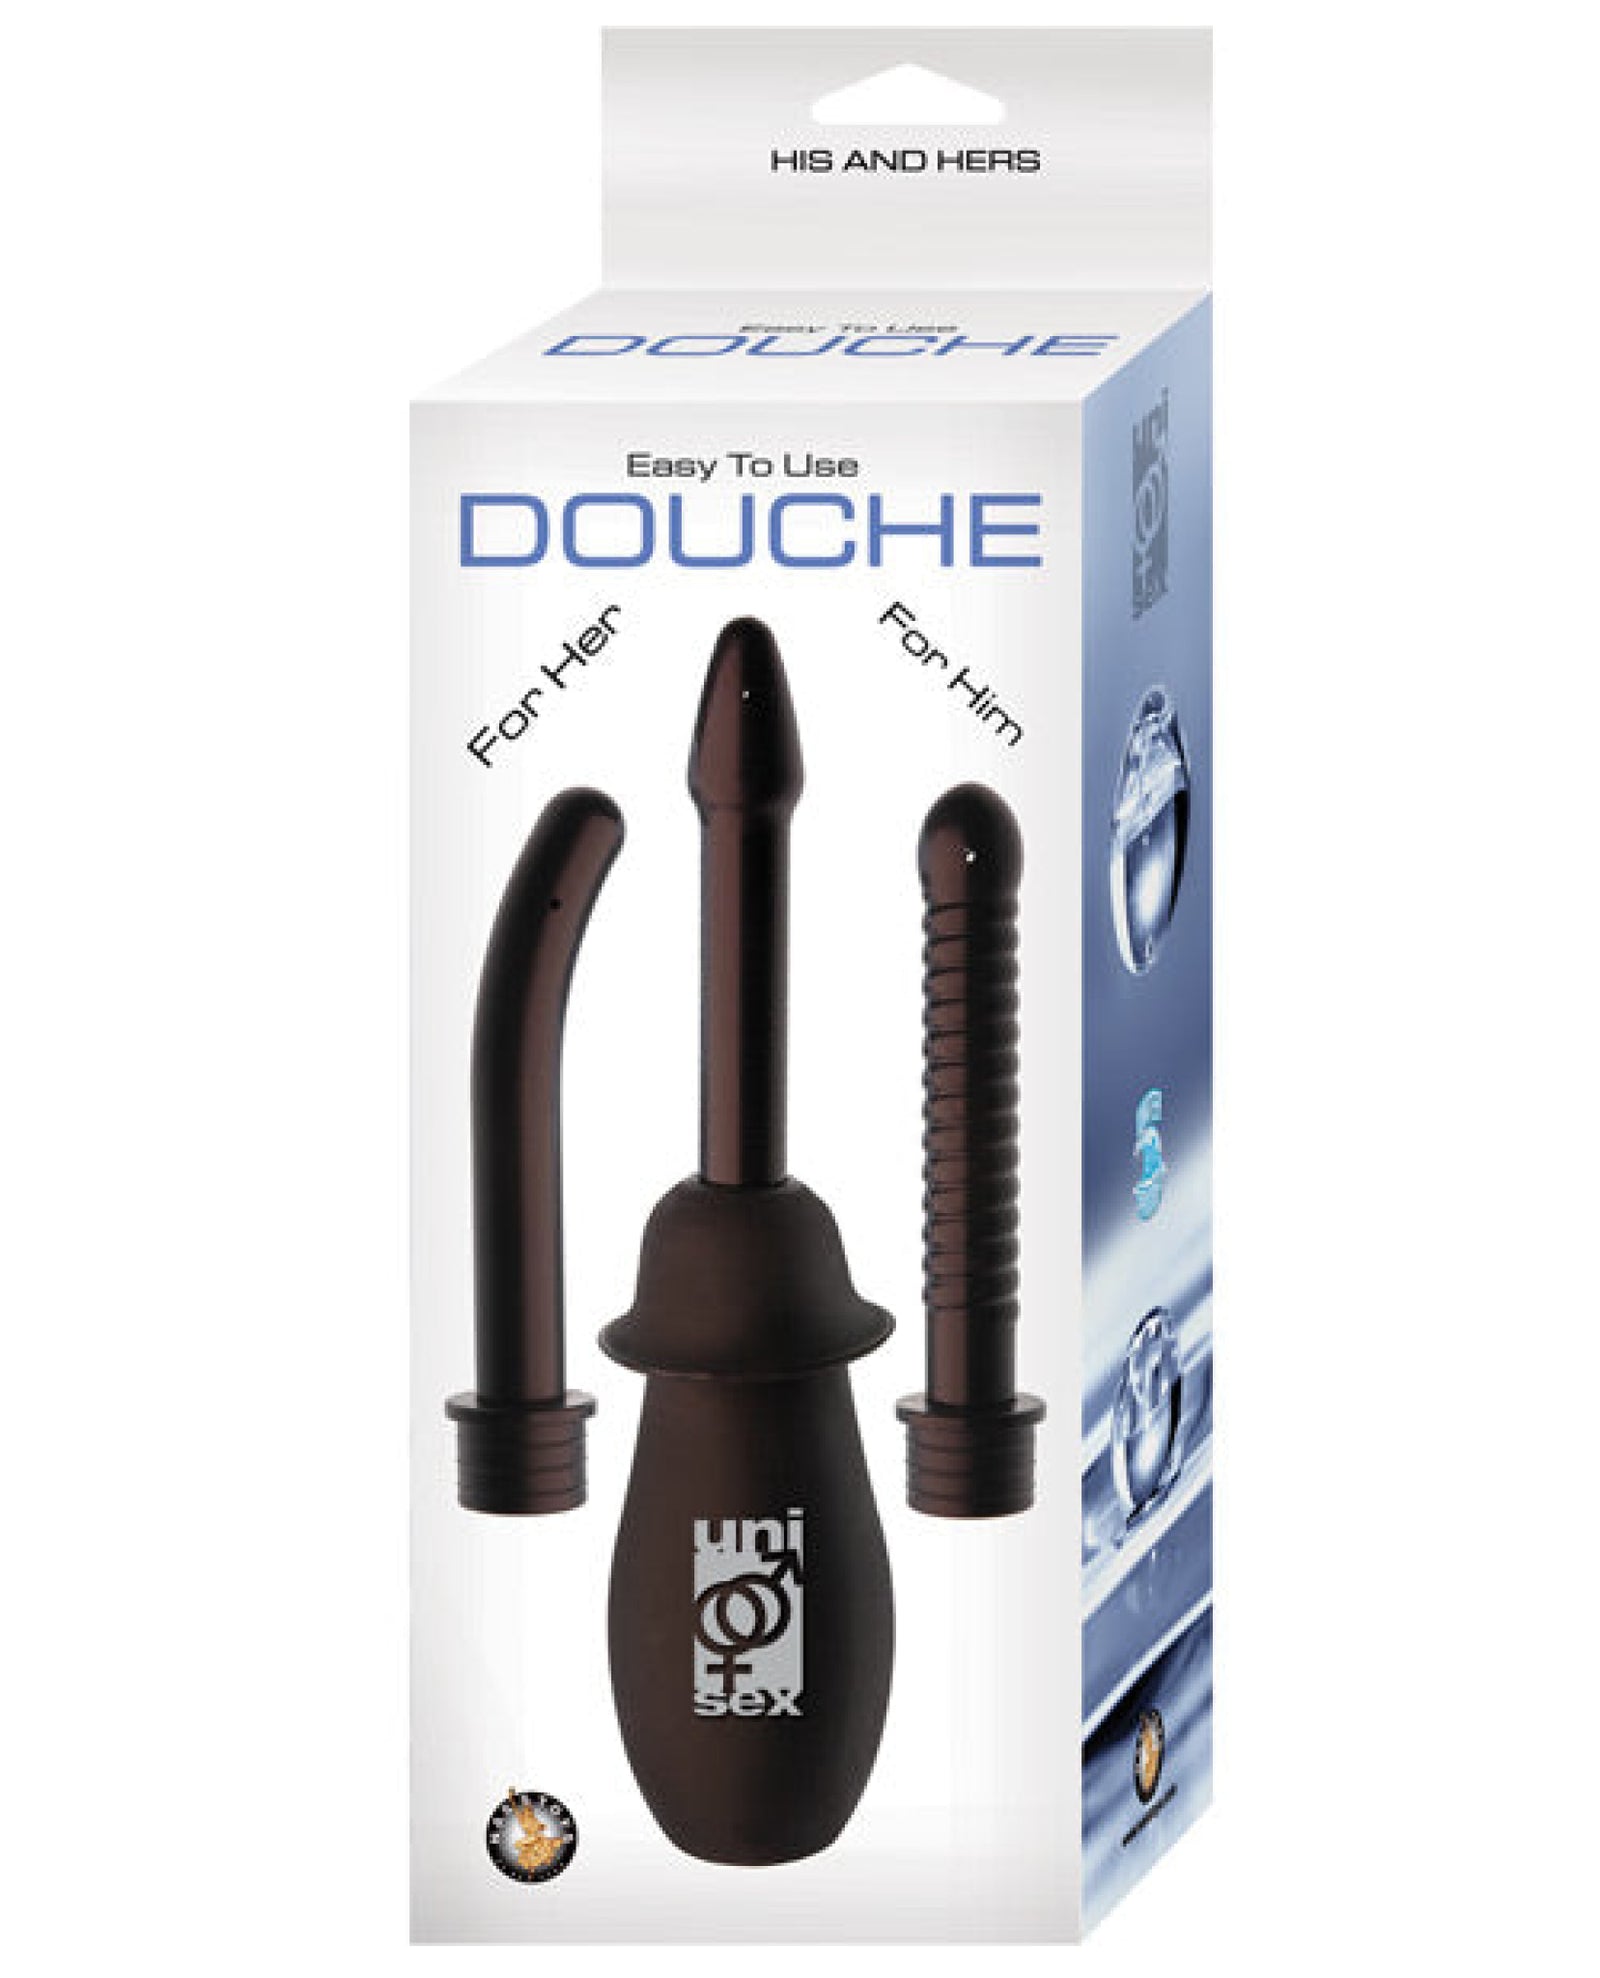 His & Hers Easy To Use Douche - Black Nasstoys